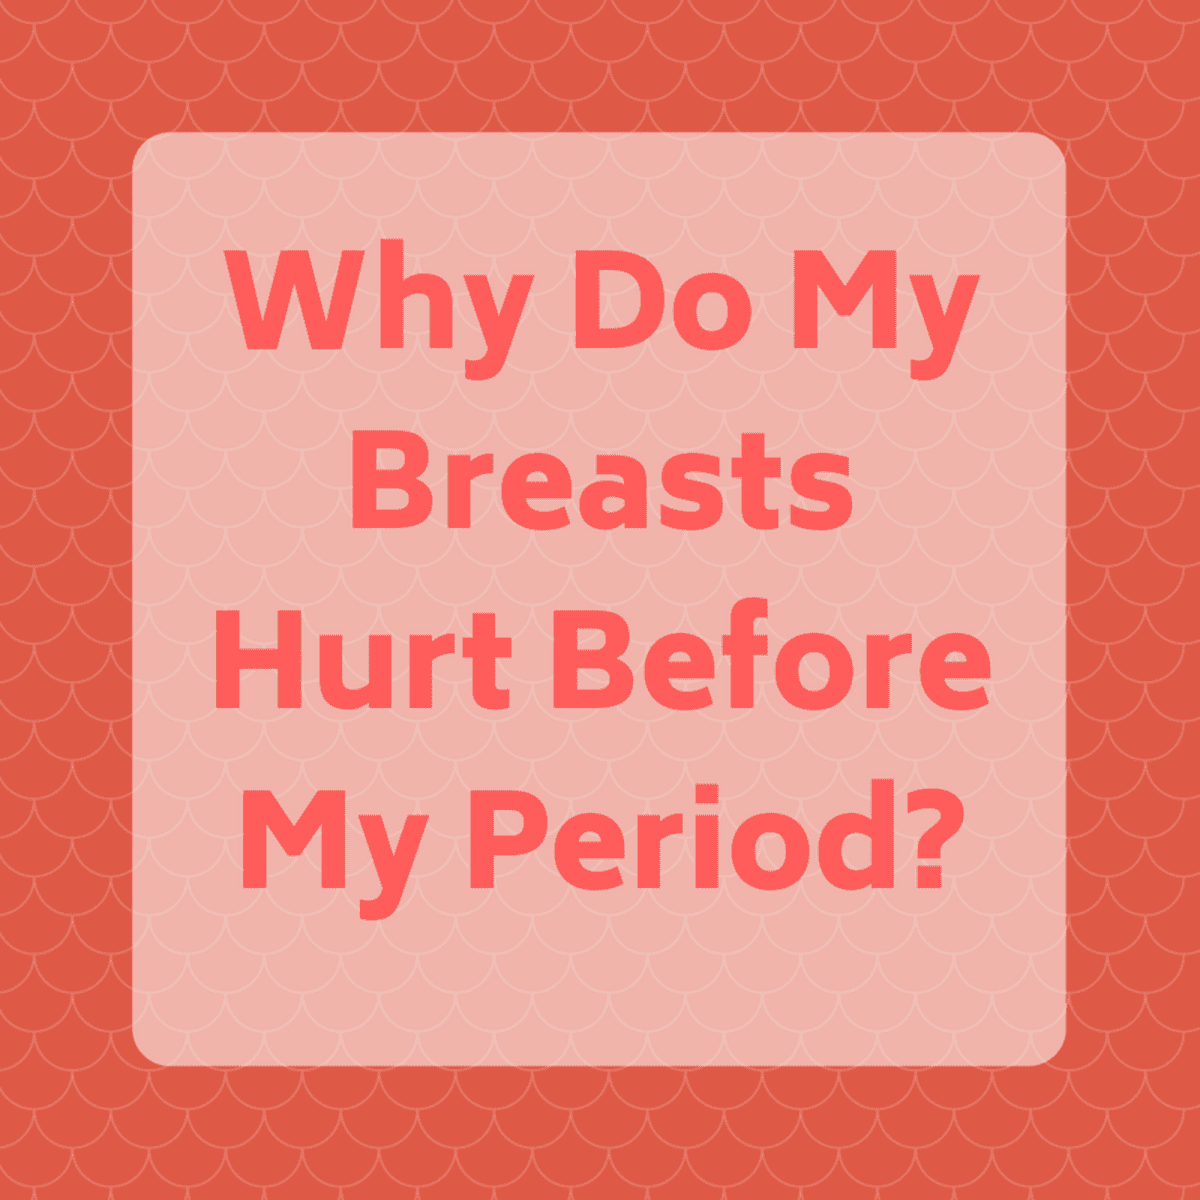 Why do my boobs hurt before my period?